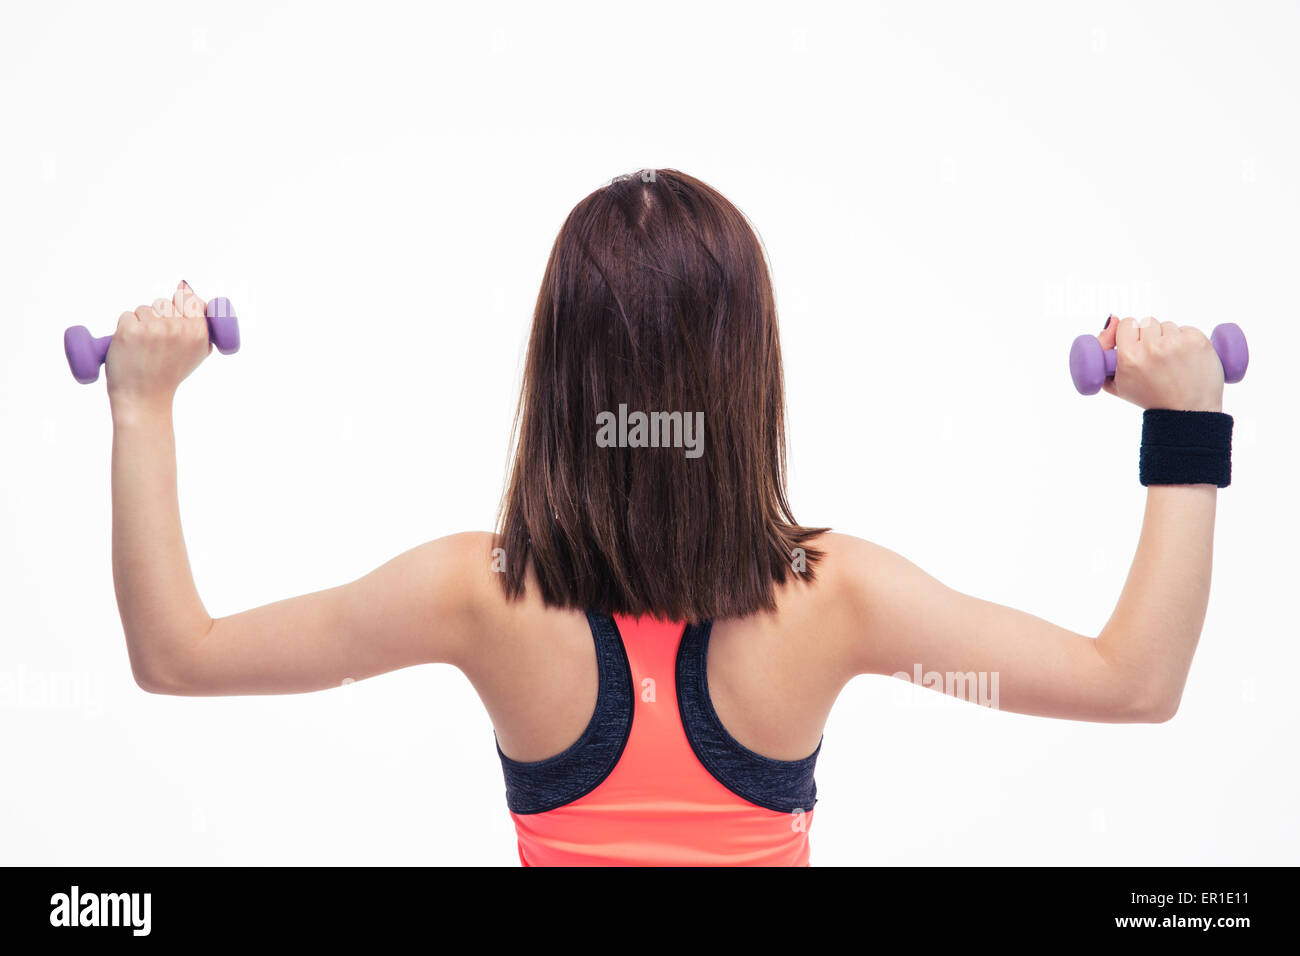 Back view portrait of a fitness woman working out with dumbbells isolated on a white backgorund Stock Photo